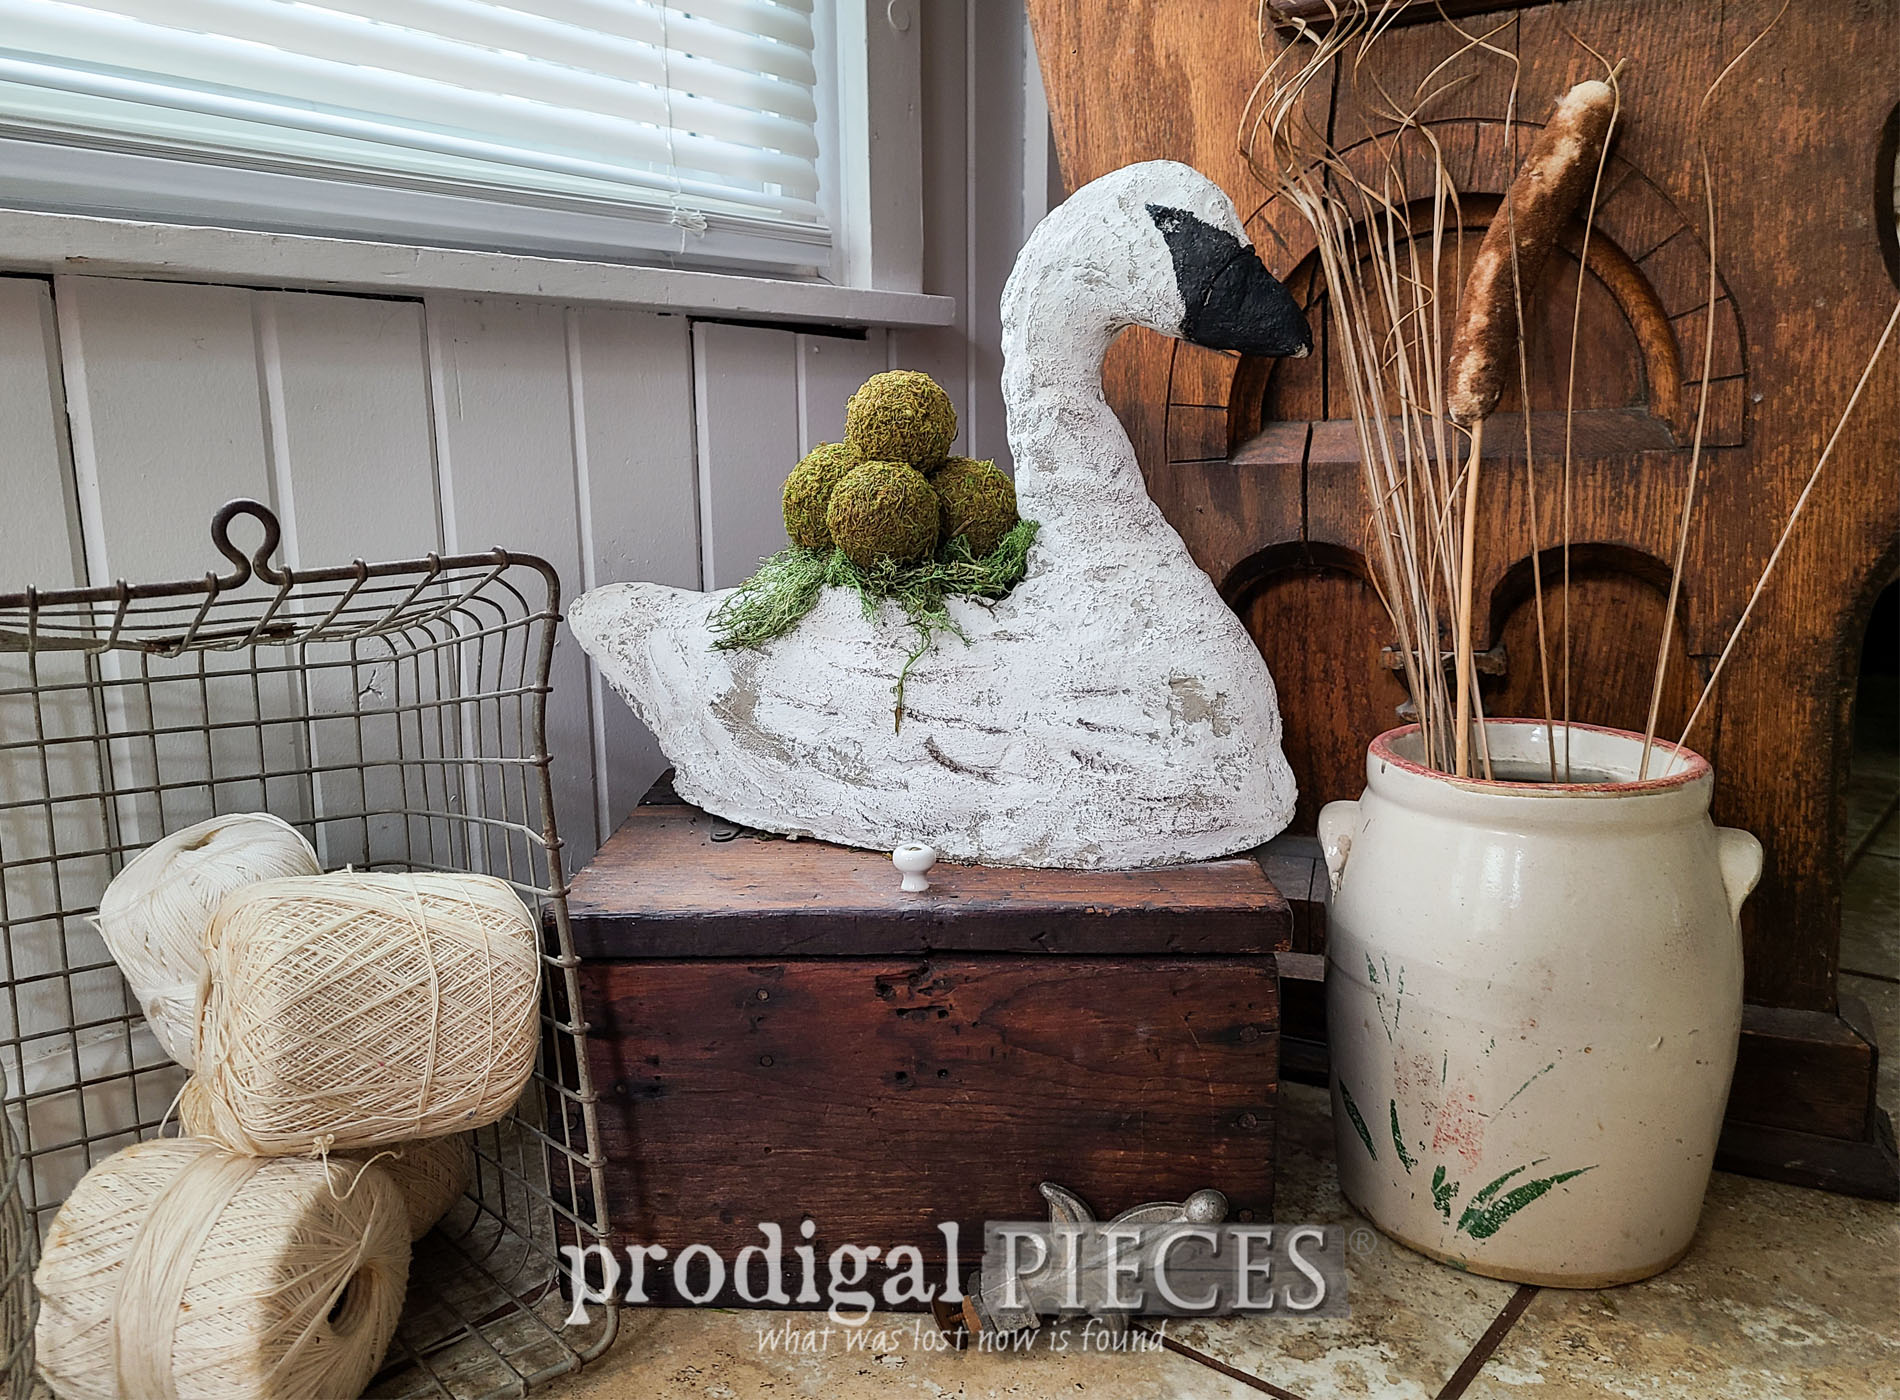 Featured DIY Concrete Planter from Broken Decor by Larissa of Prodigal Pieces | prodigalpieces.com #prodigalpieces #diy #concrete #crafts #planter #gardening